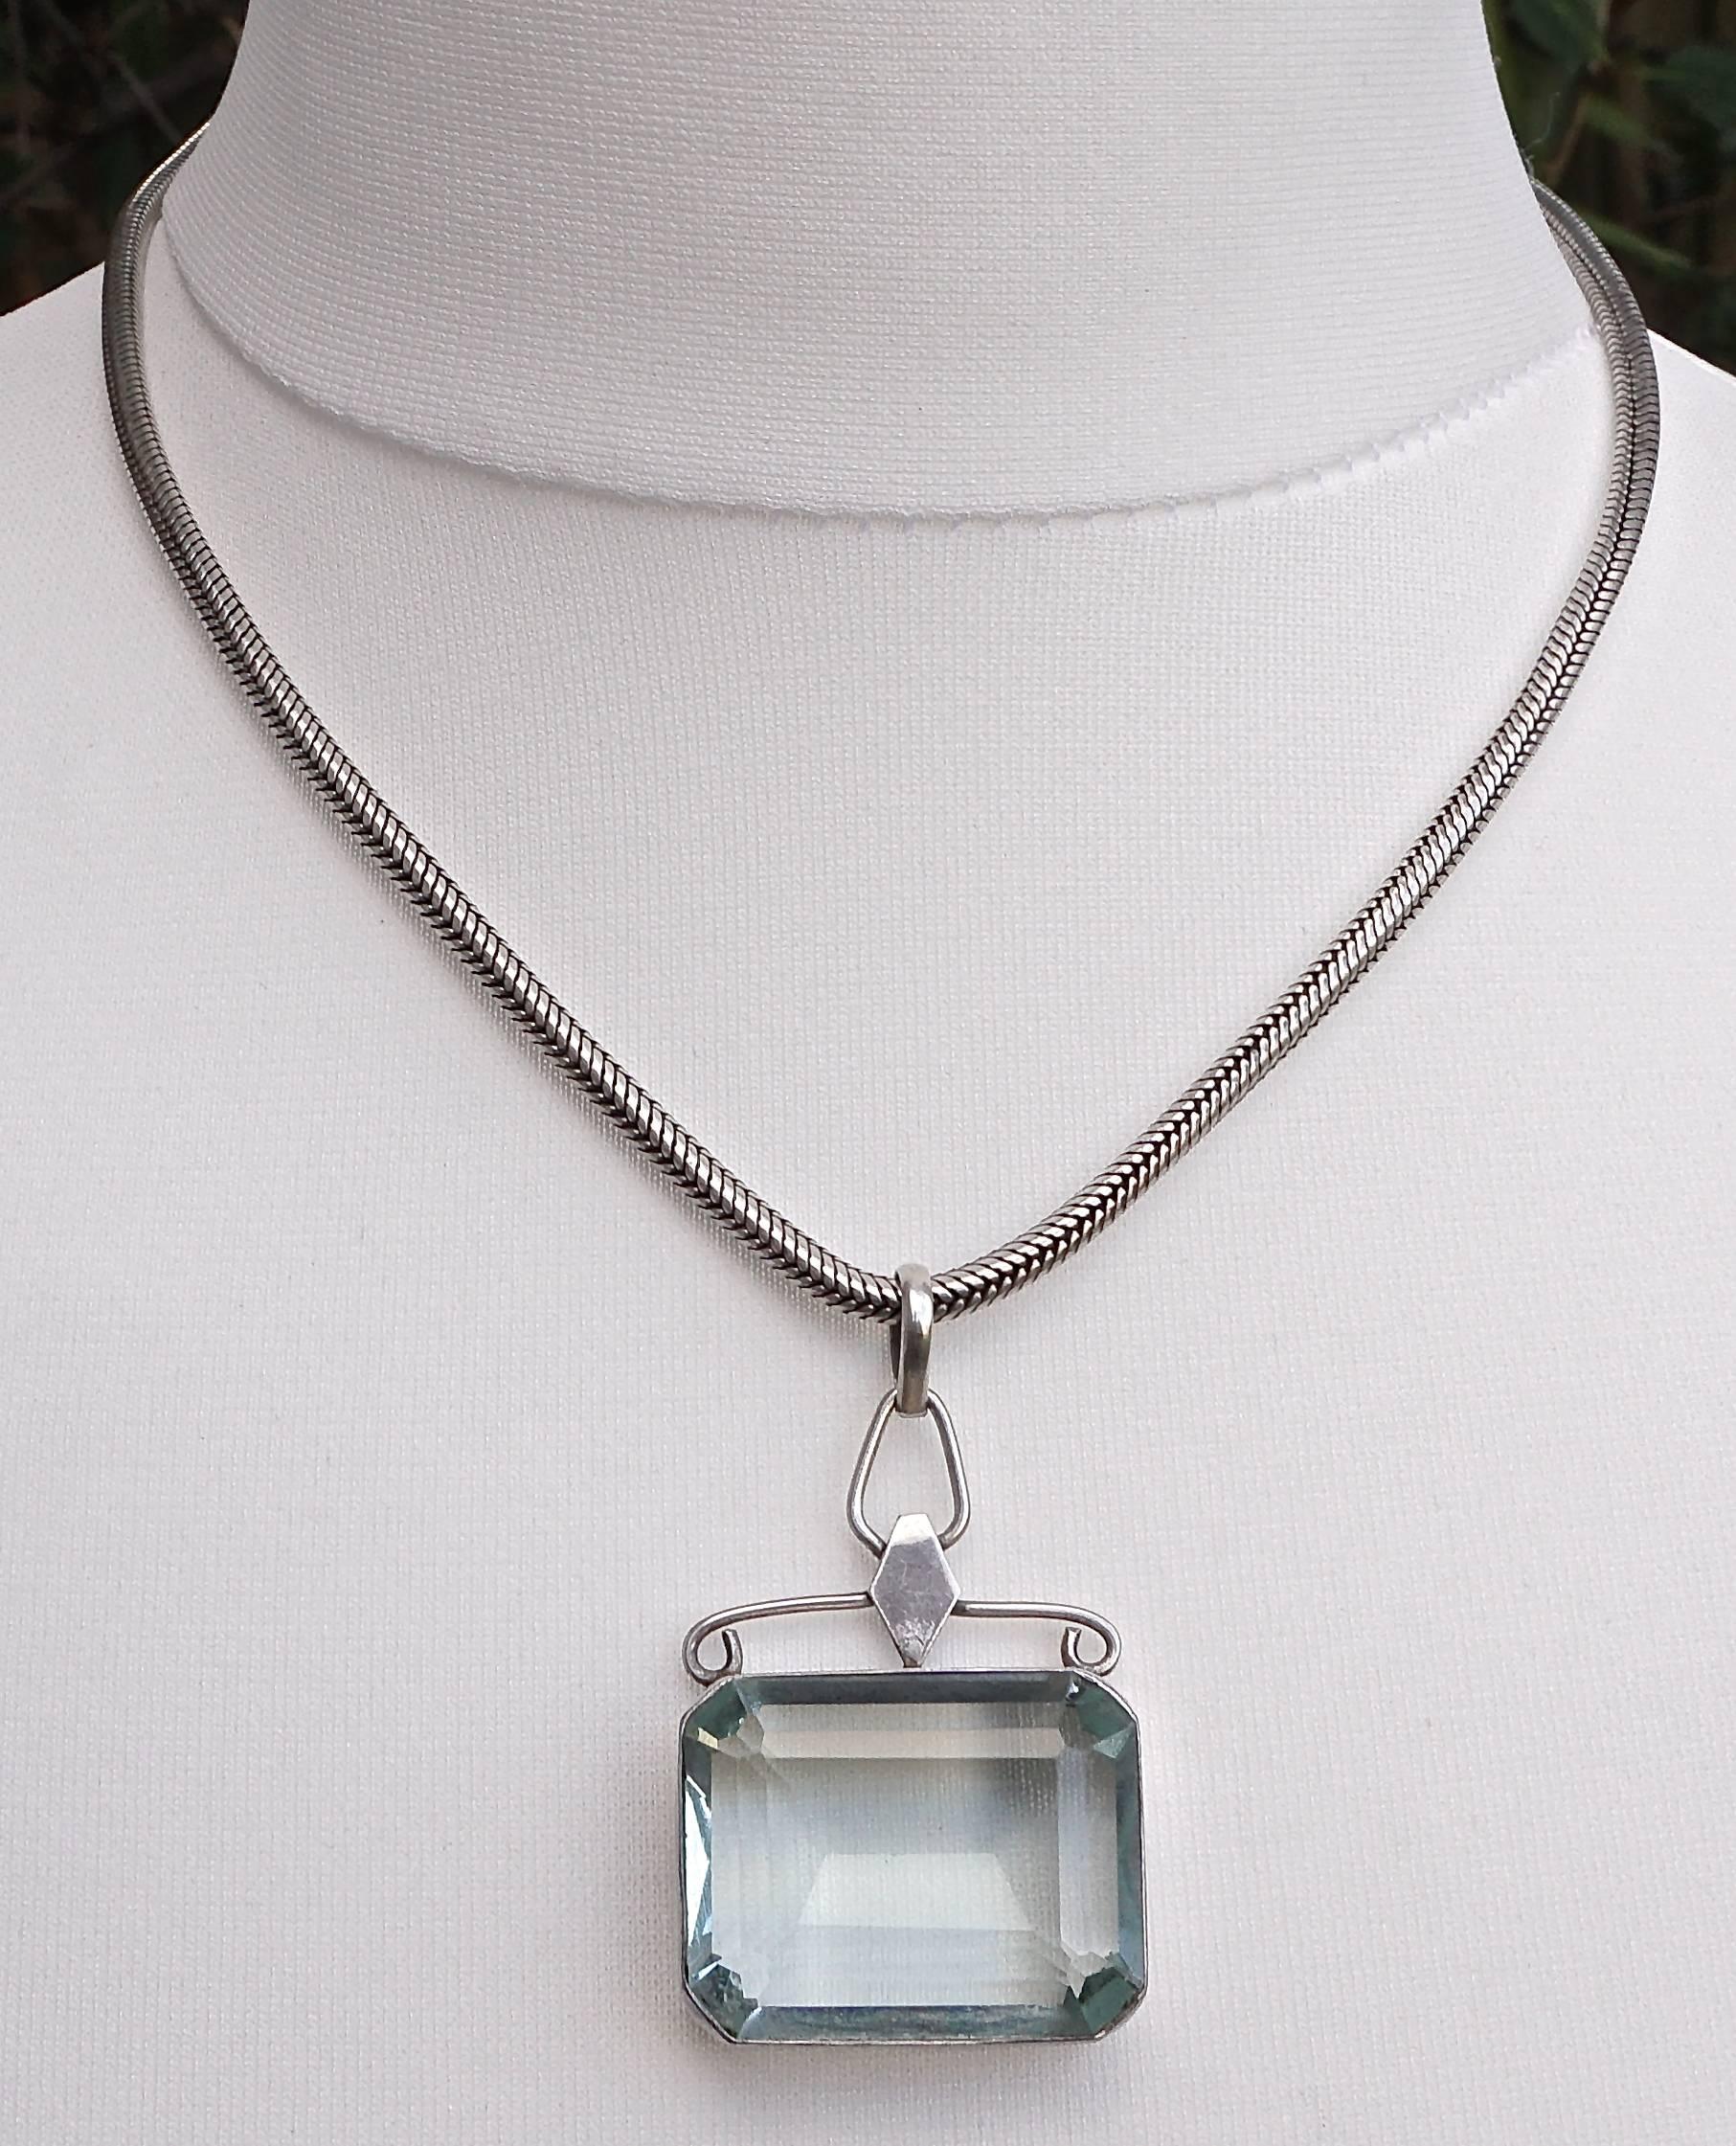 Vintage silver necklace with a large emerald cut glass pendant. The beautiful pale aqua stone measures 2.8cm, 1.1 inch, by 2.3cm, .9 inch, and is held in a simple hand forged setting, depth 7mm, .27 inch. The heavy silver snake chain has an ornate